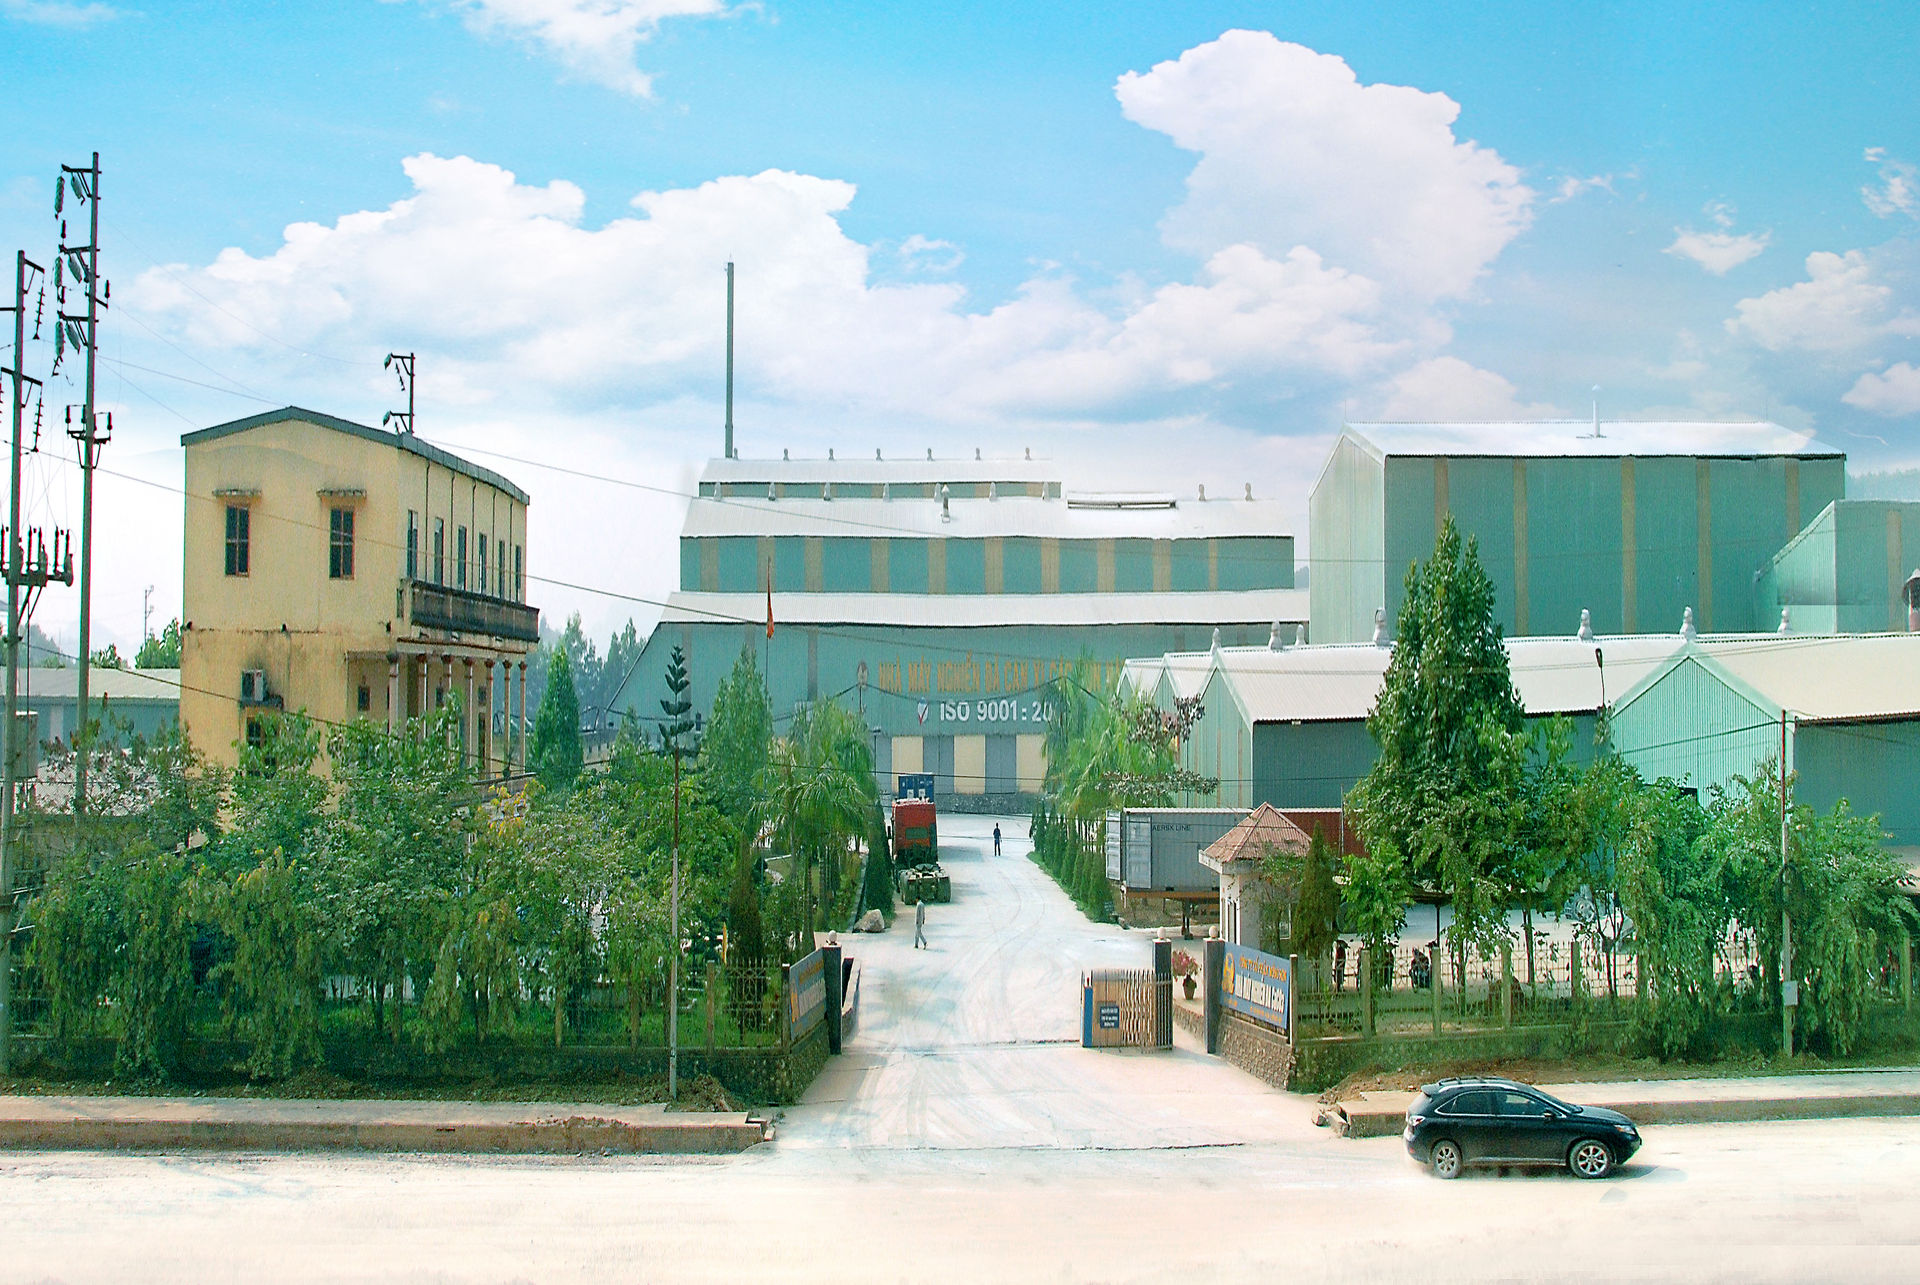 MONG SON’S CACO3 GRINDING PLANT